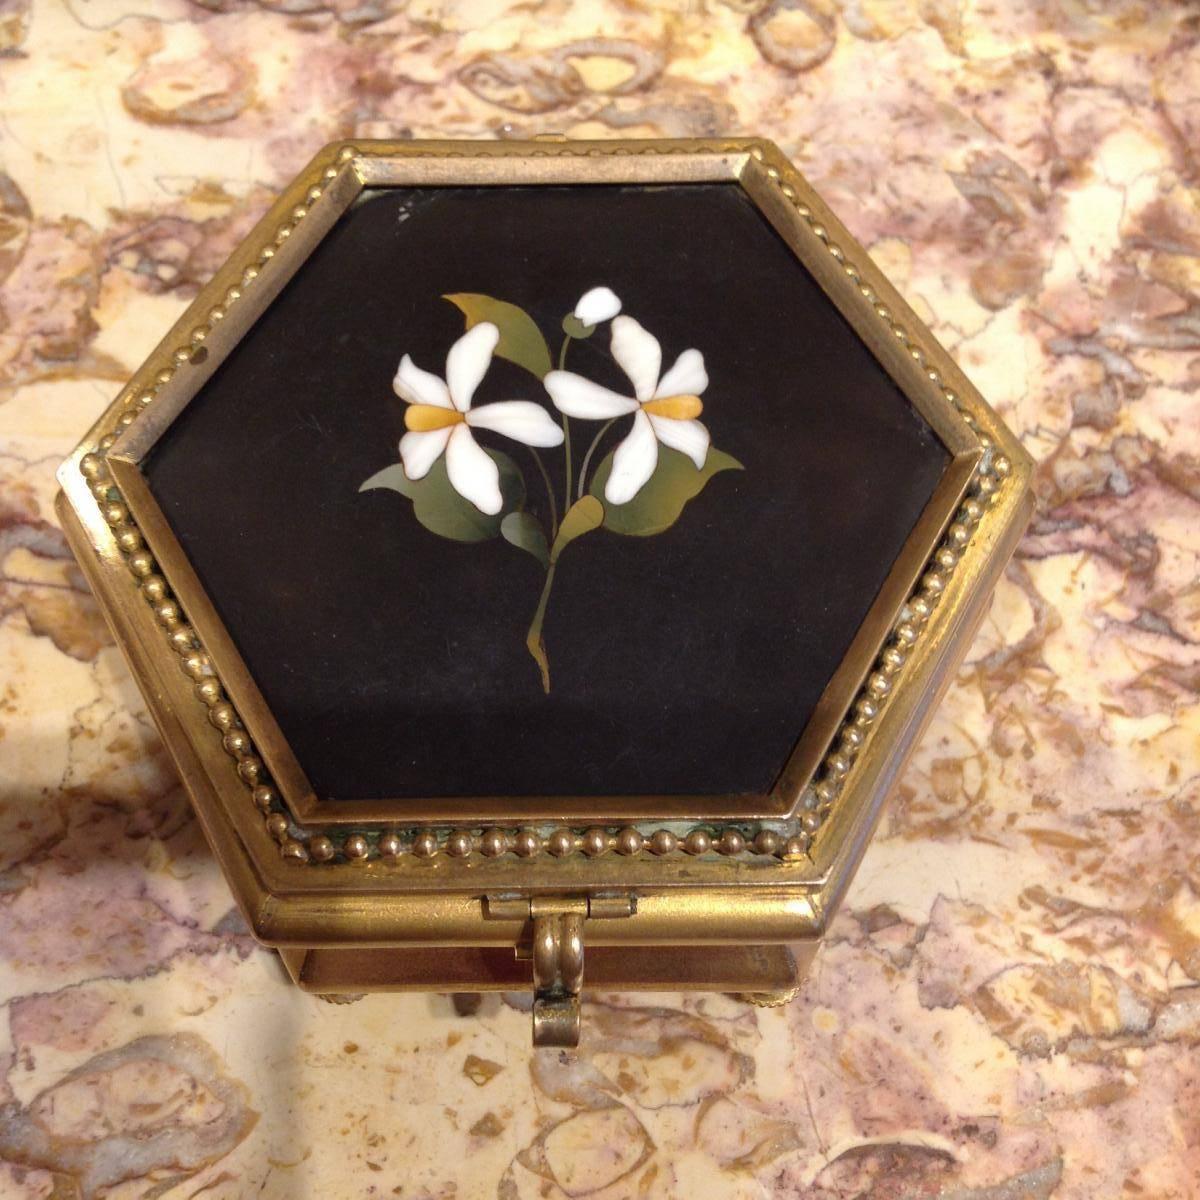 Gilt bronze jewelry box inlaid marble and decorated with flowers exagonal form.
Suitable to complete a small collection or to make a sophisticated gift to a woman.
Interior silk of origin slightly rocket.
Period late 19th century.